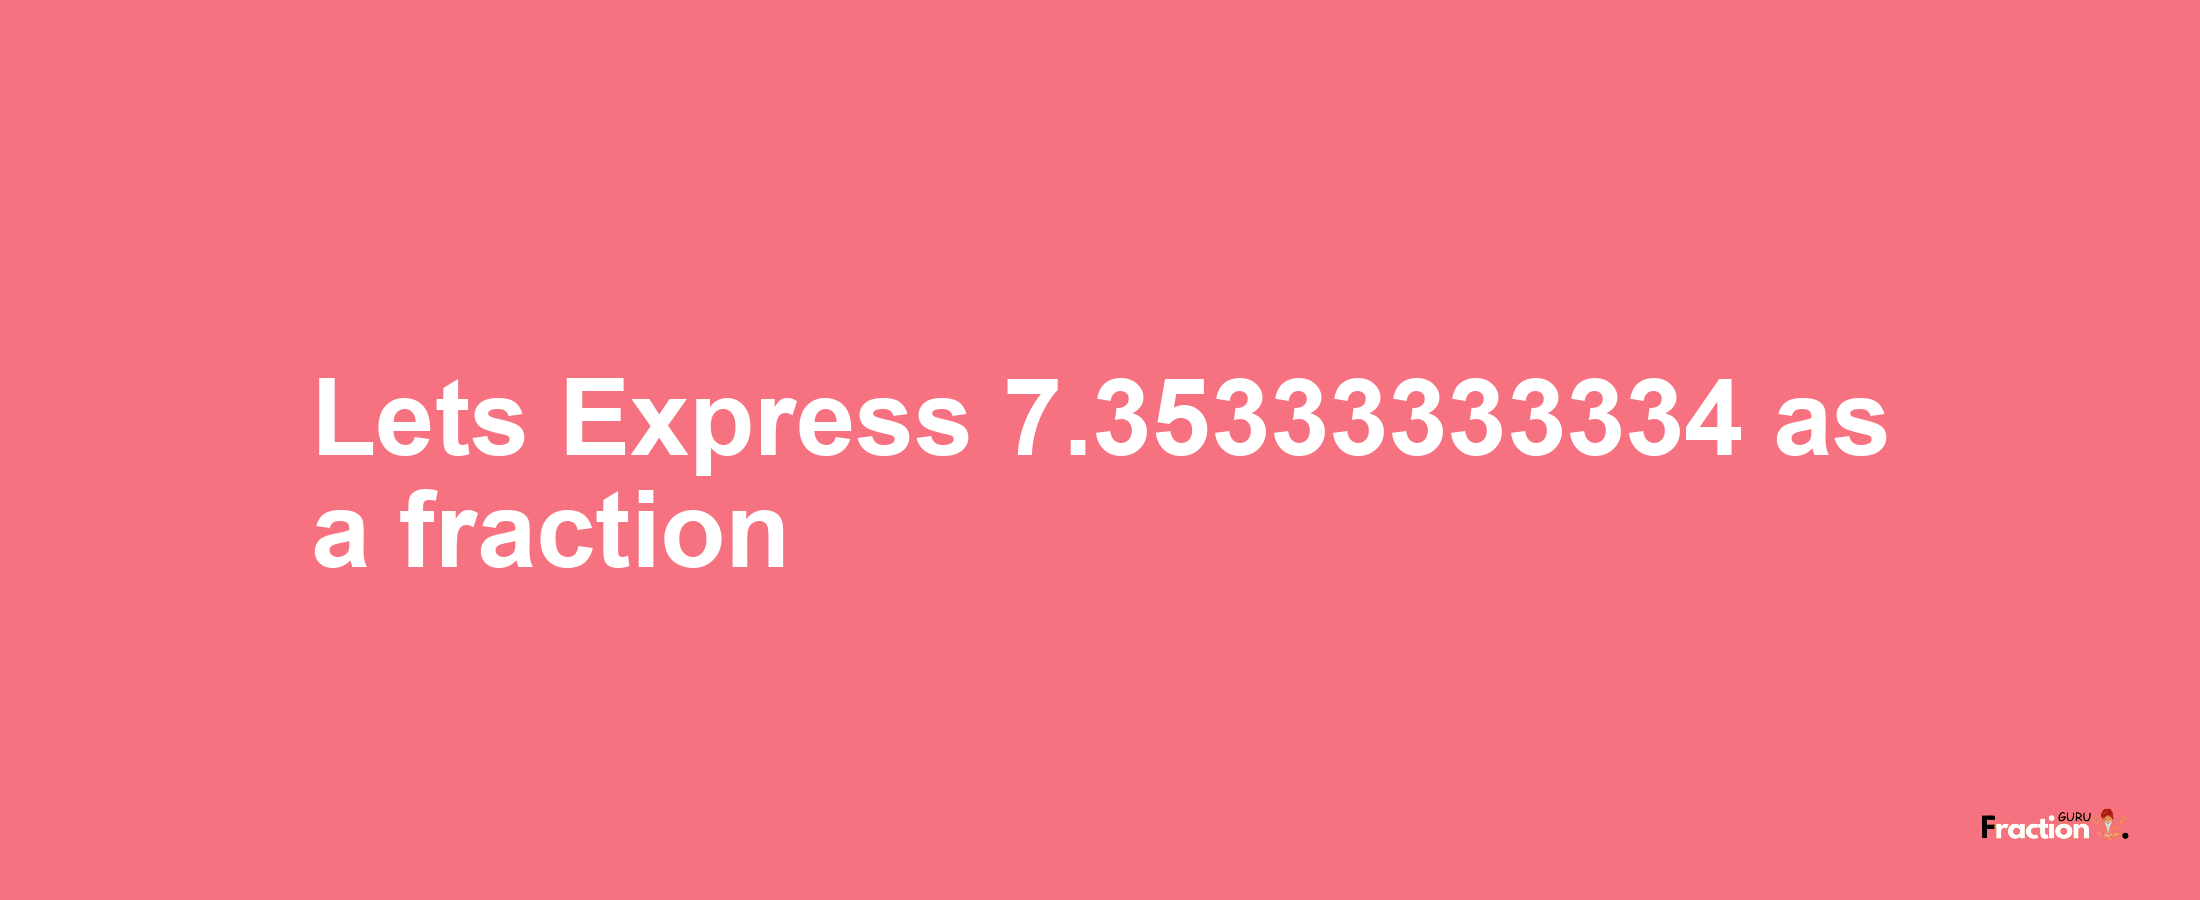 Lets Express 7.35333333334 as afraction